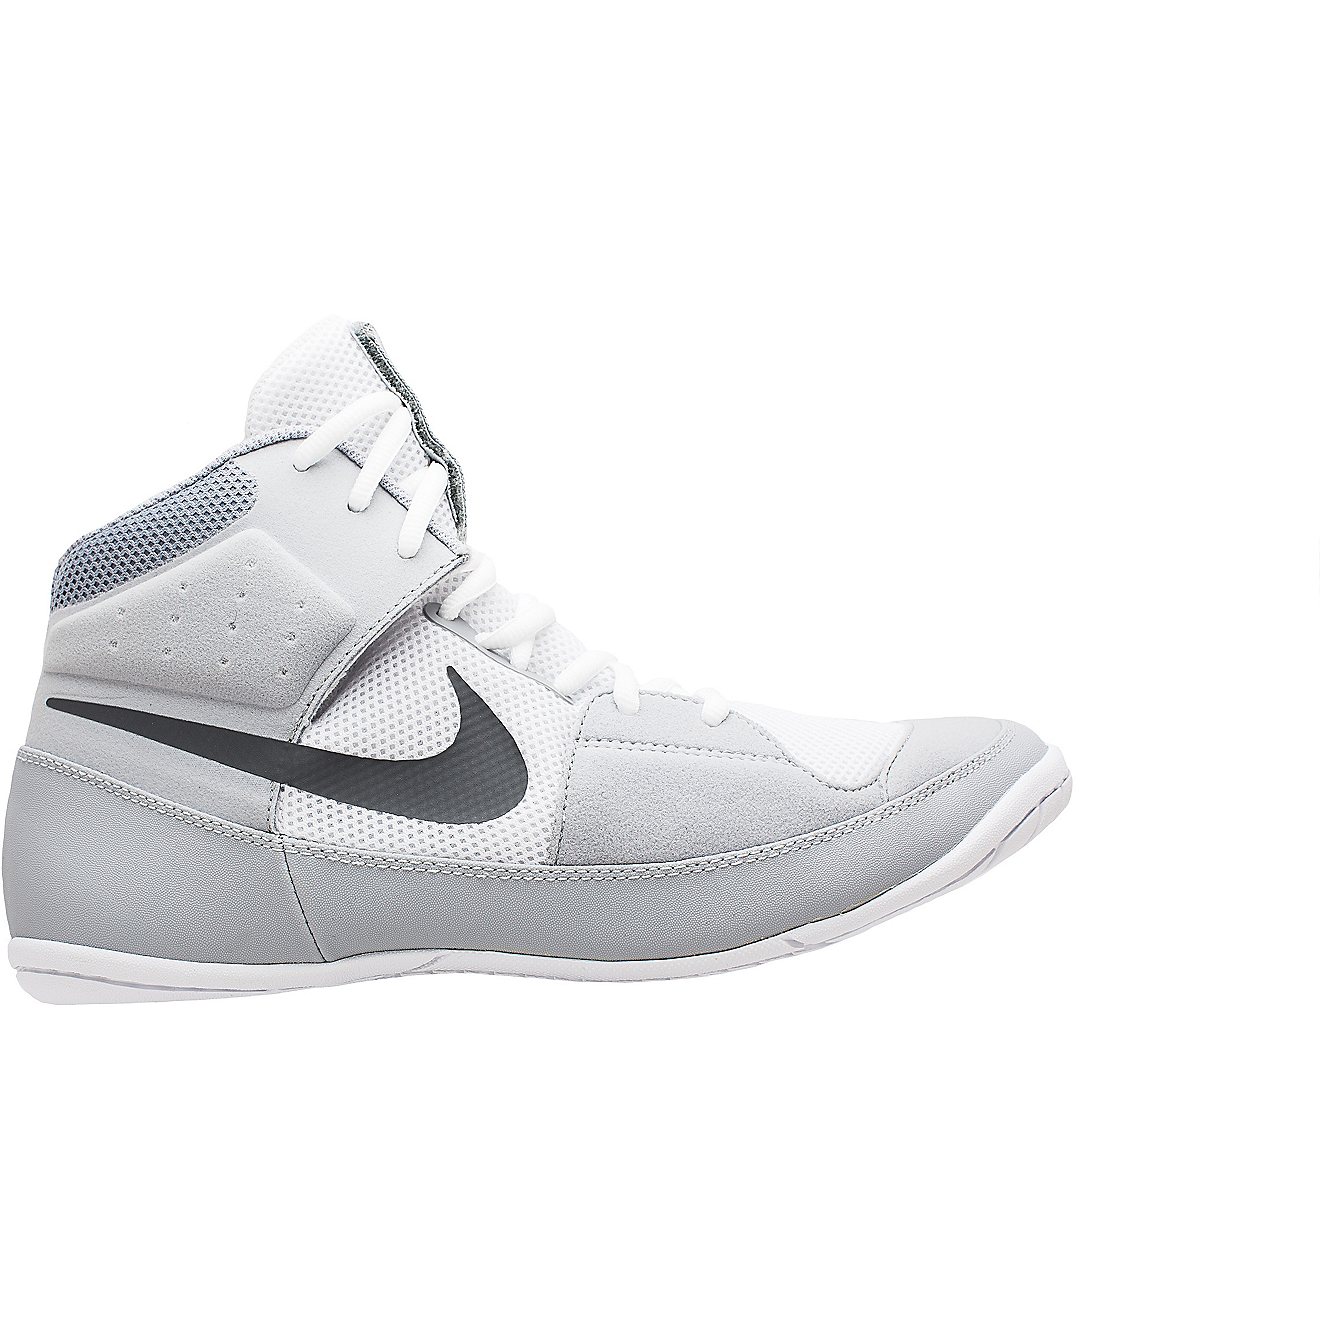 Nike Men's Fury Wrestling Shoes | Free Shipping at Academy